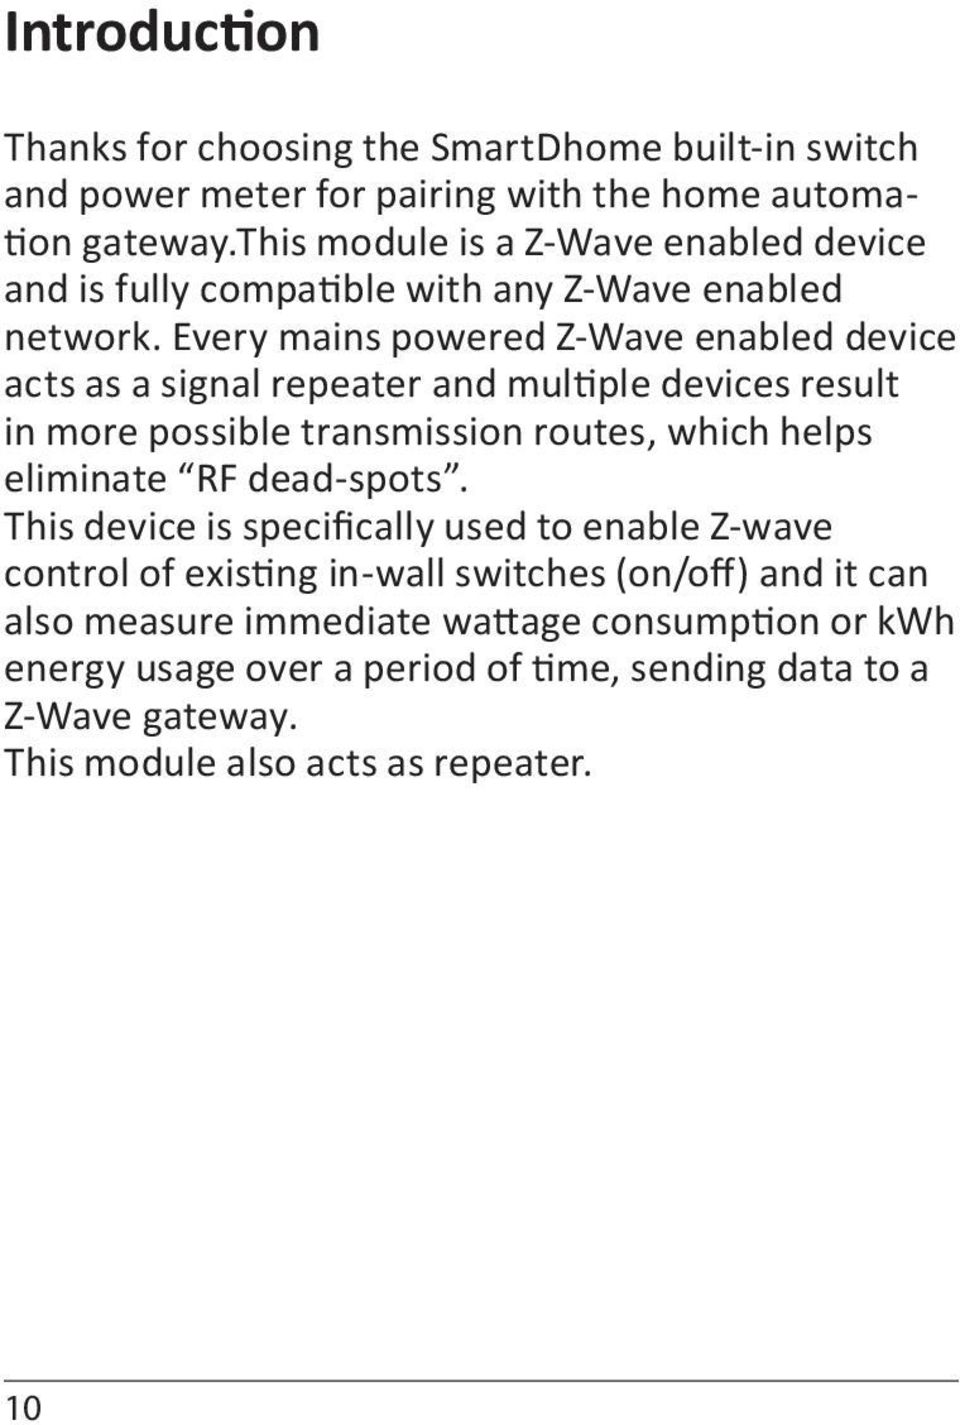 Every mains powered Z-Wave enabled device acts as a signal repeater and multiple devices result in more possible transmission routes, which helps eliminate RF